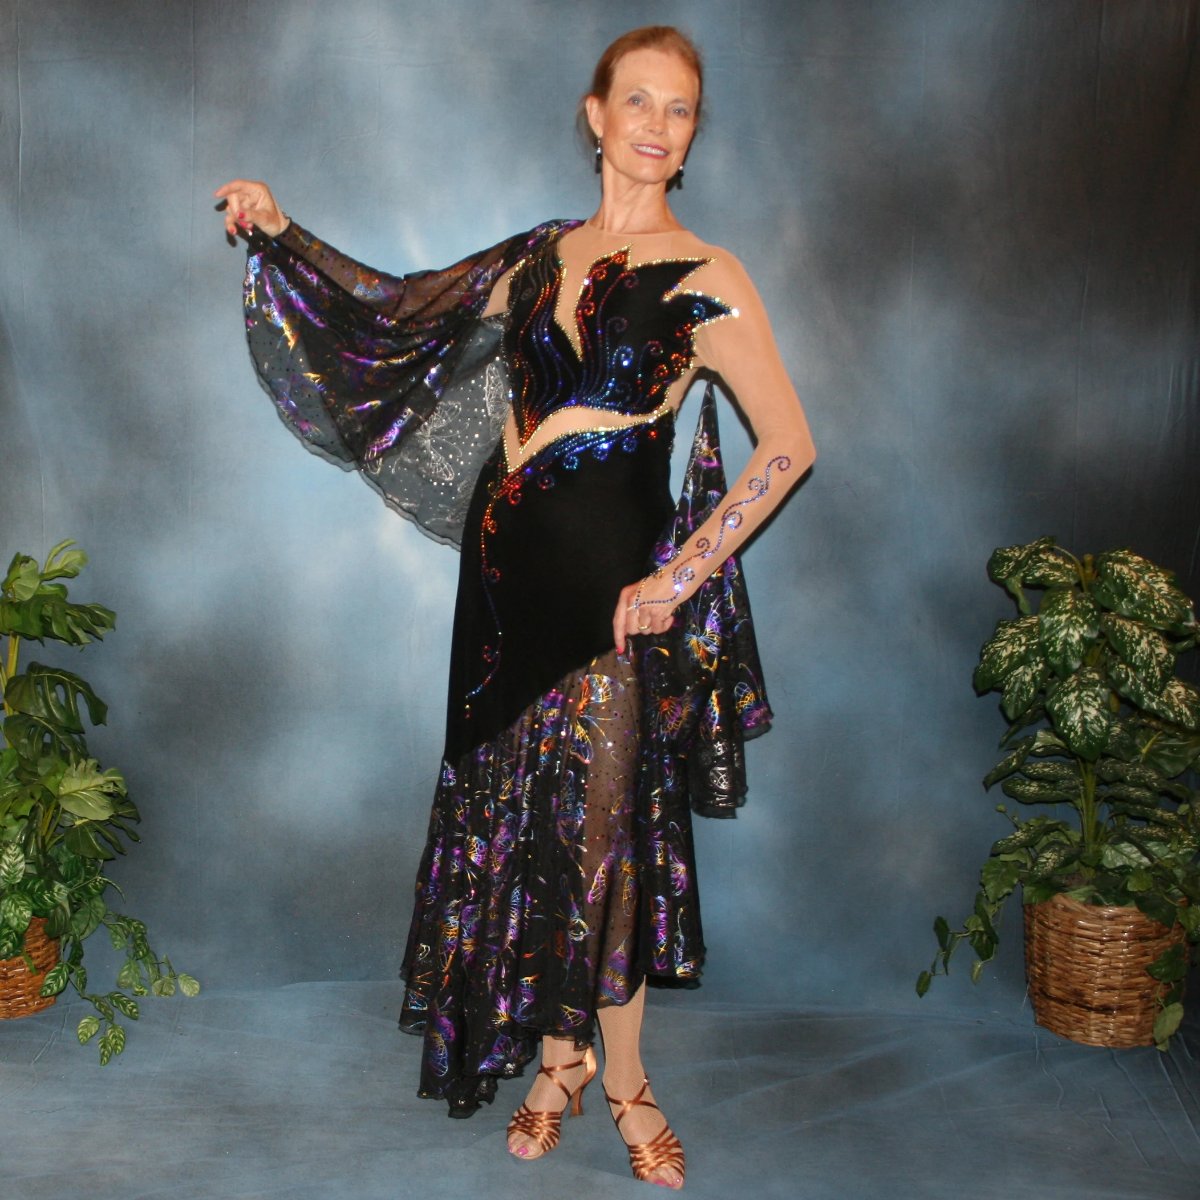 Black tango dress created of black luxurious solid slinky artistically patterned out on a nude illusion base, this dramatic dress design features hologram butterfly print flounces & floats. Crystal Meridian Blue Swarovski rhinestones embellish in detail to finish.